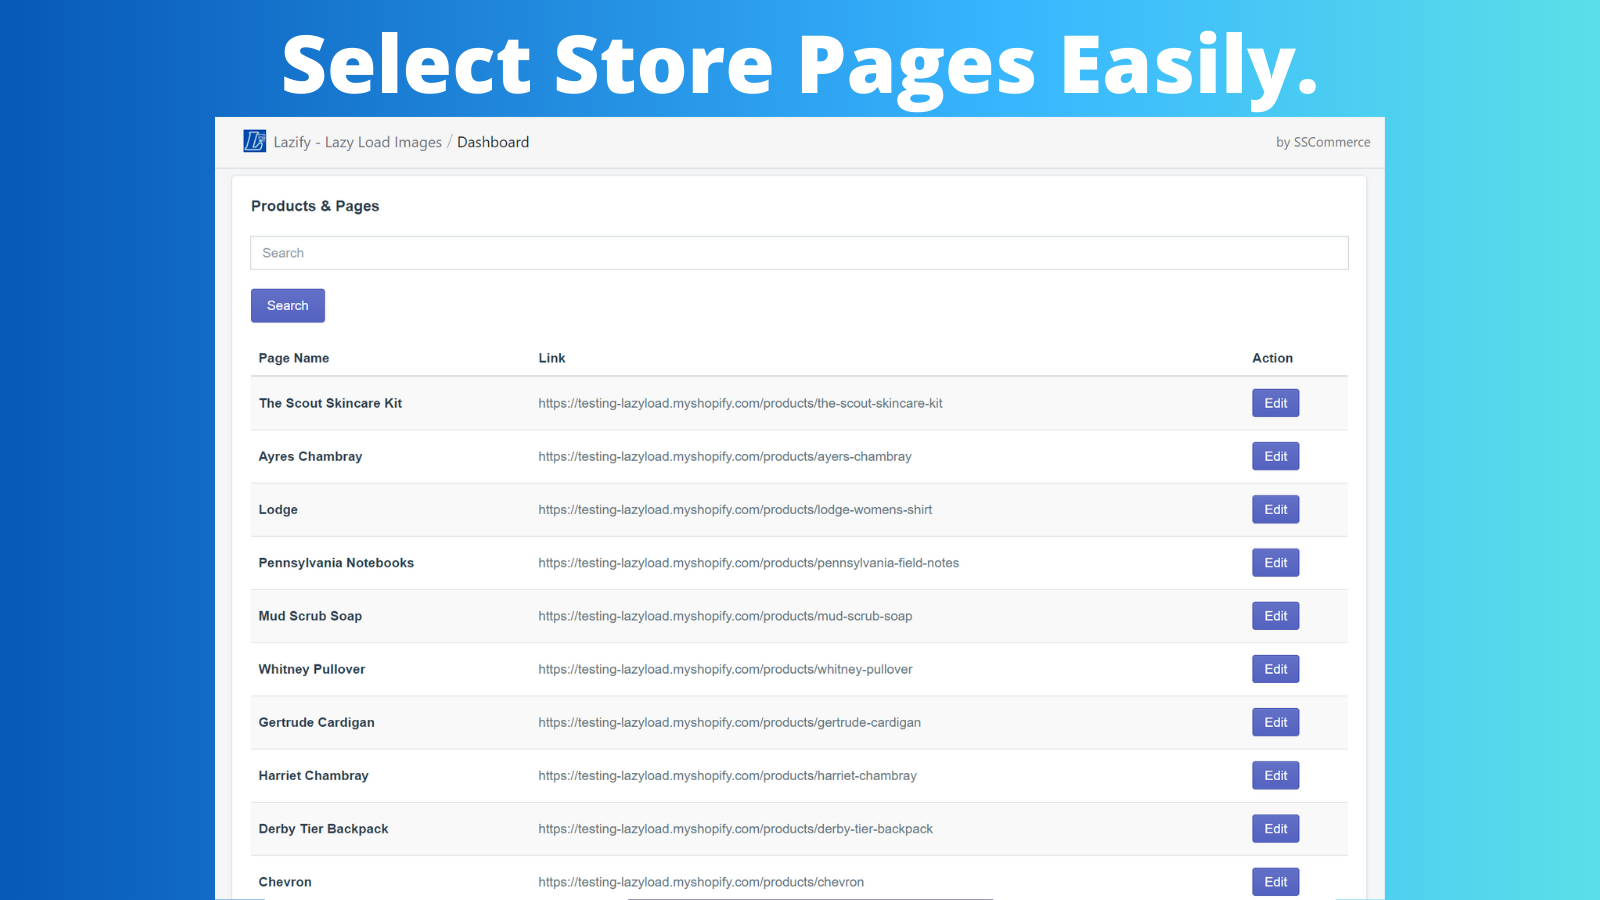 Select Store Pages Easily